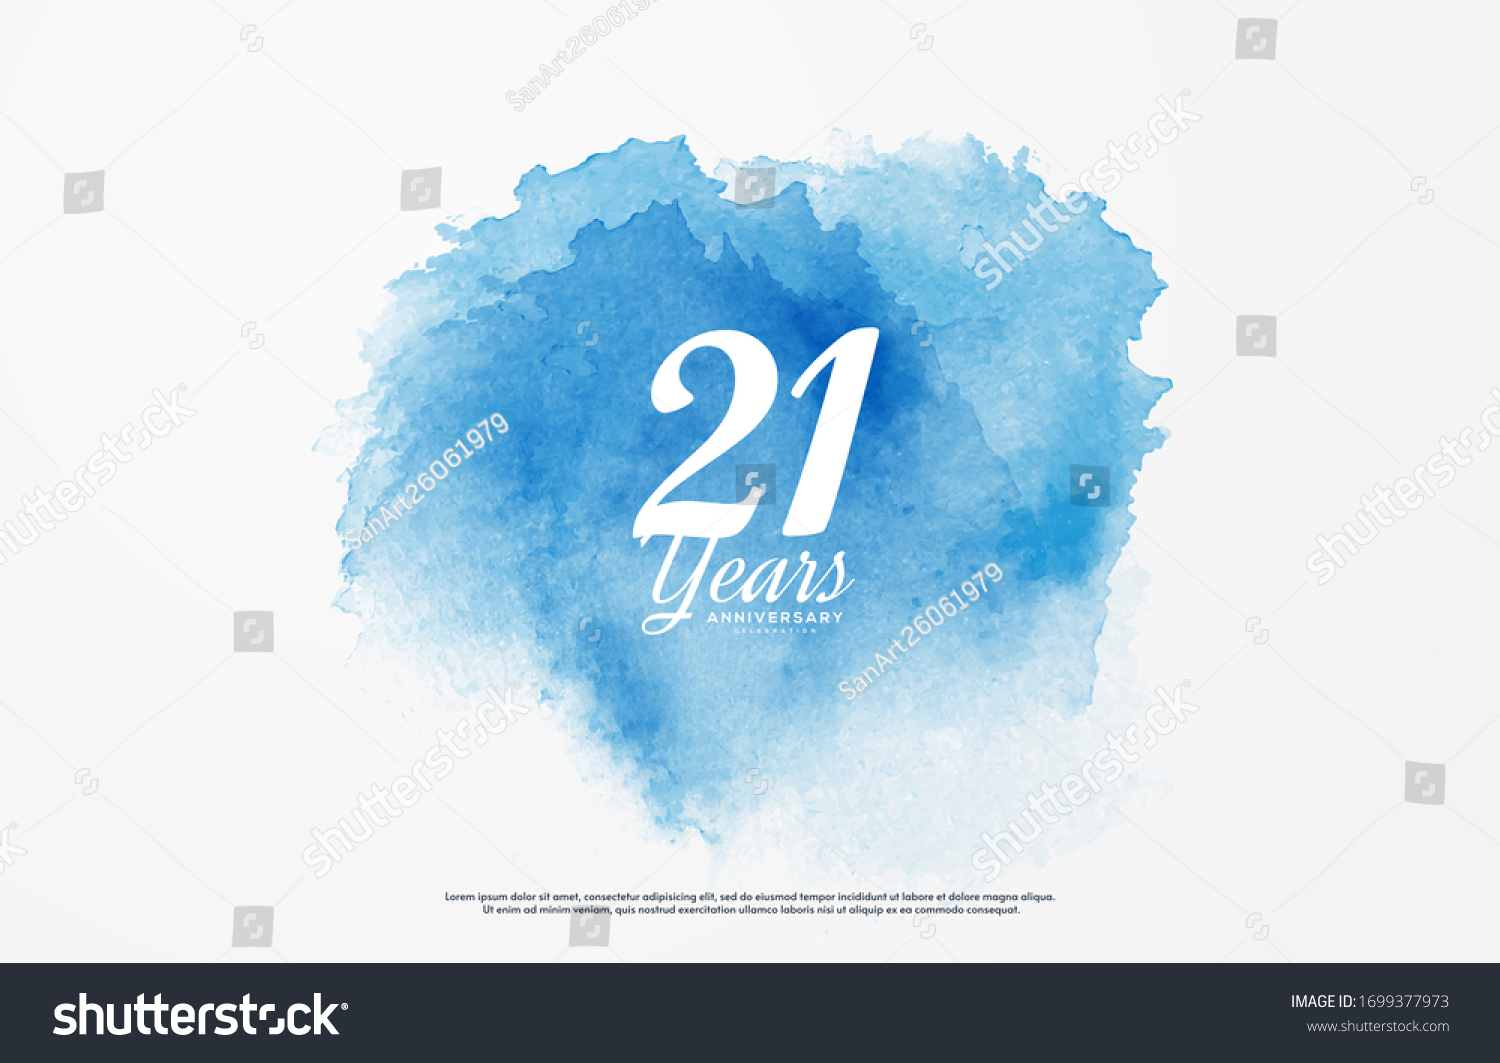 SVG of 21st anniversary background with illustrations of white numbers and the writing below on a water color background. svg